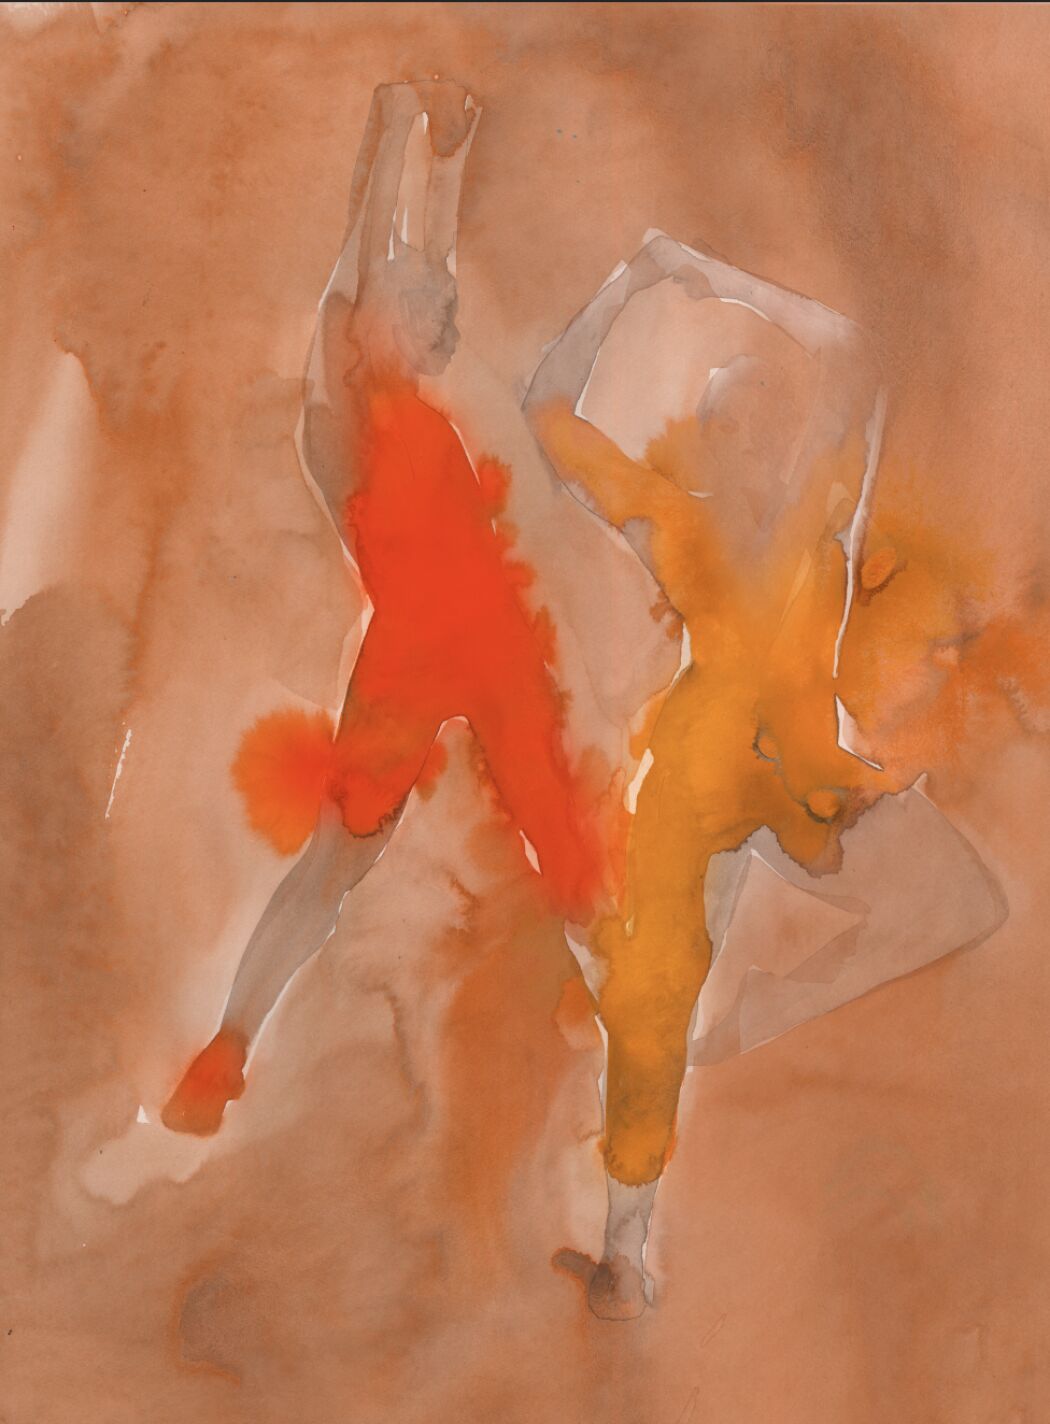 Dancers illustrated by the contemporary watercolor artist Stina Persson